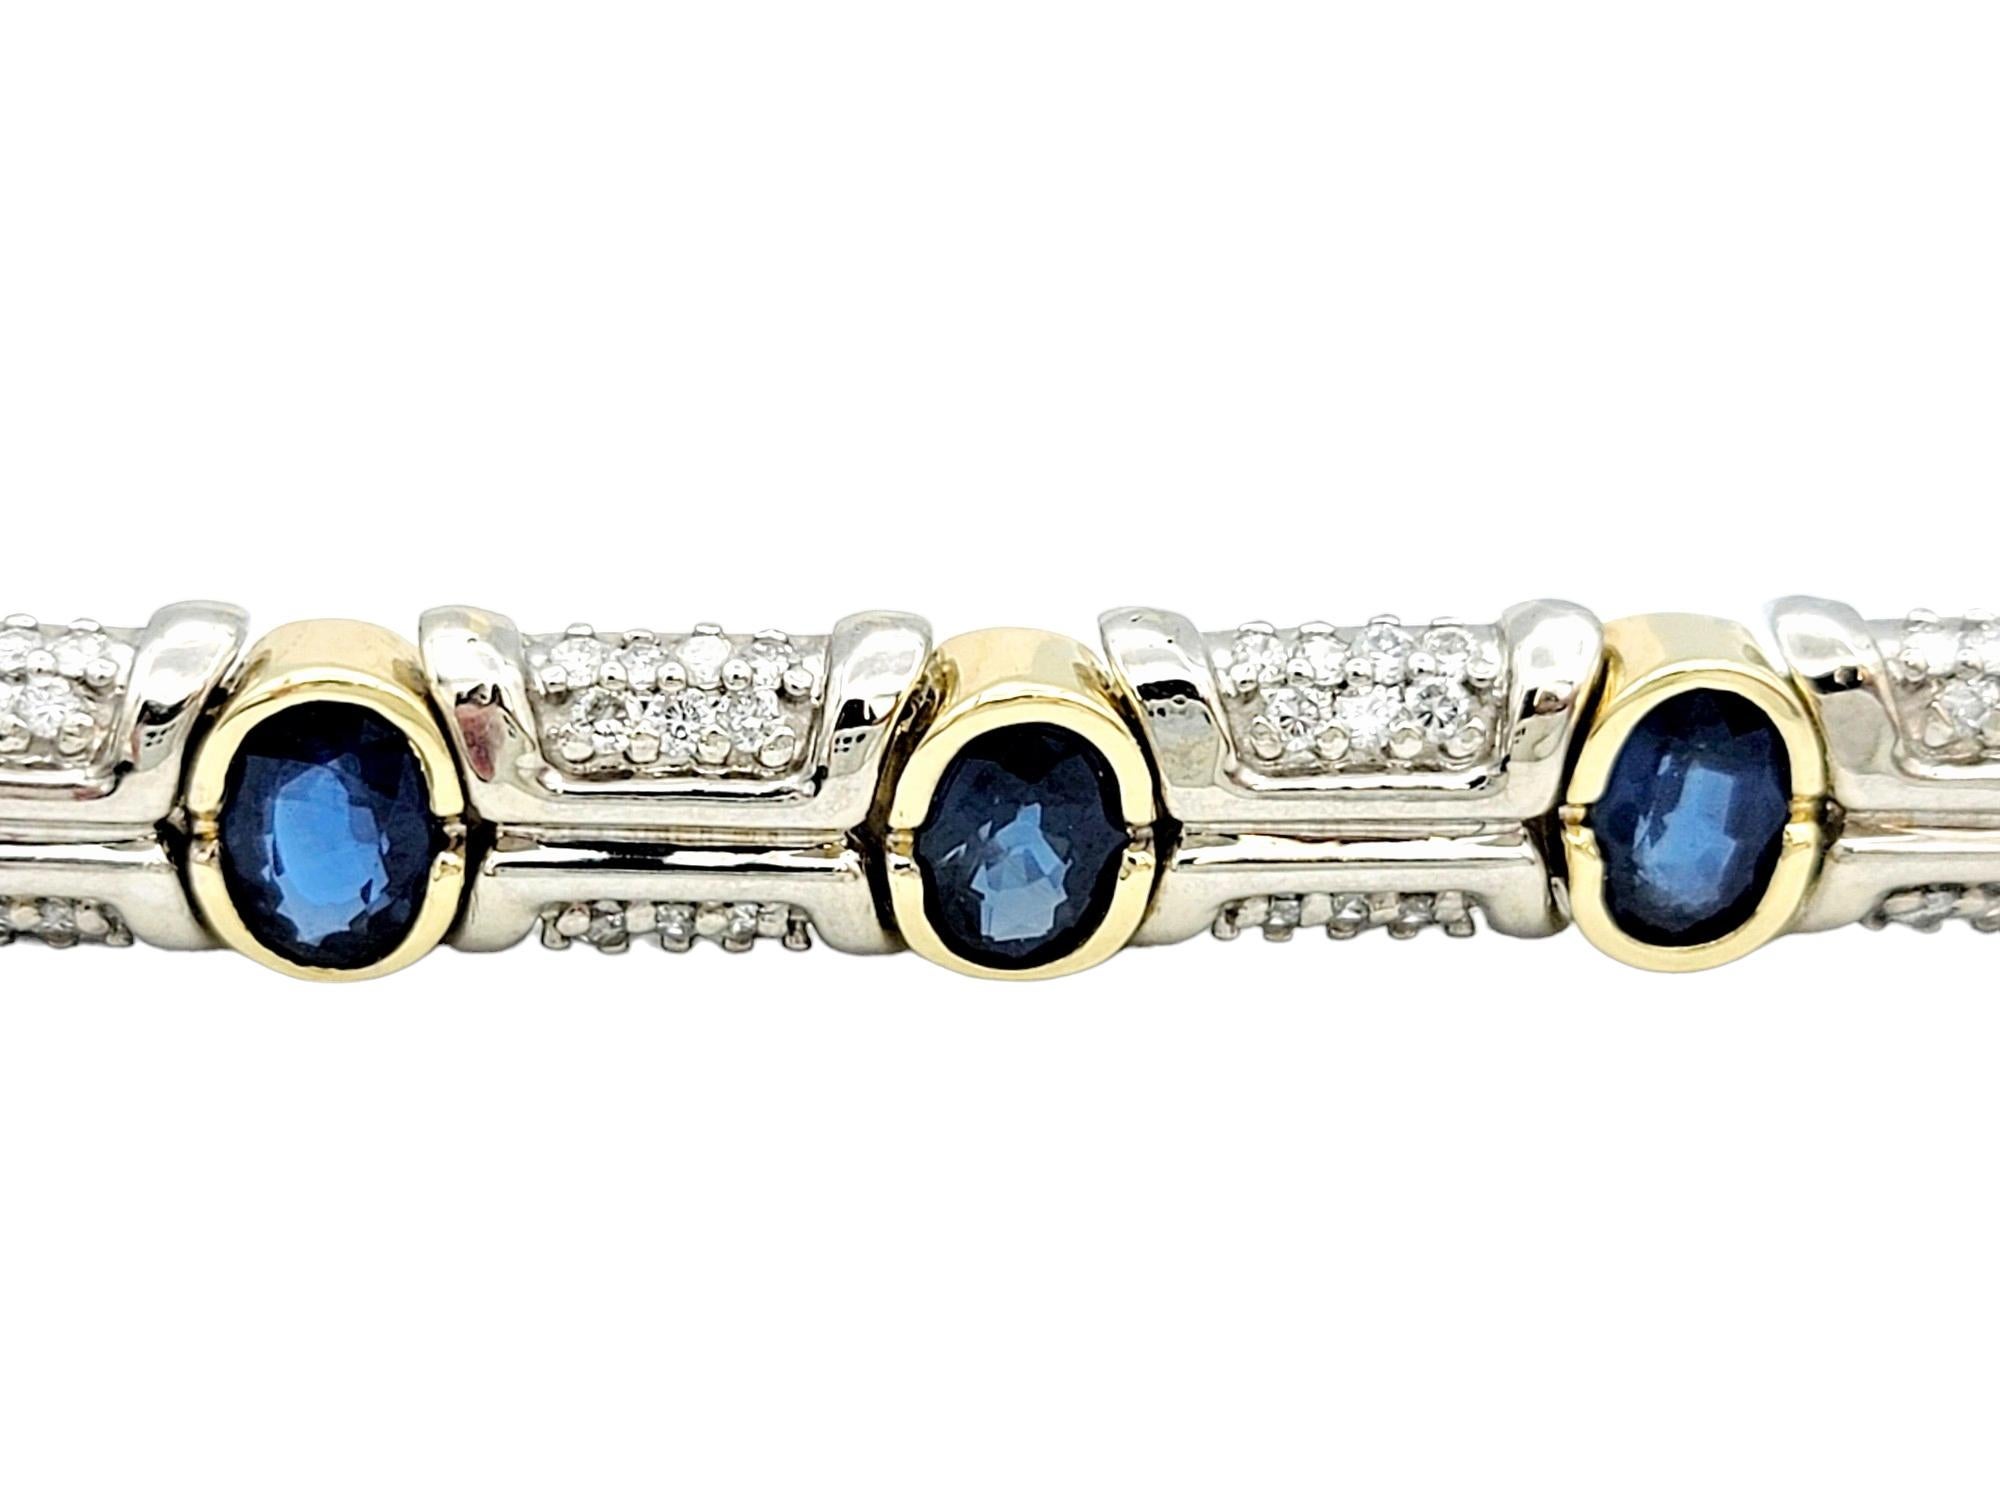 Adorn your wrist with the captivating beauty of this two-toned tennis bracelet, a masterful creation that seamlessly blends 14 karat white and yellow gold. The bracelet features a mesmerizing alternation of bezel-set sapphires and diamonds, each